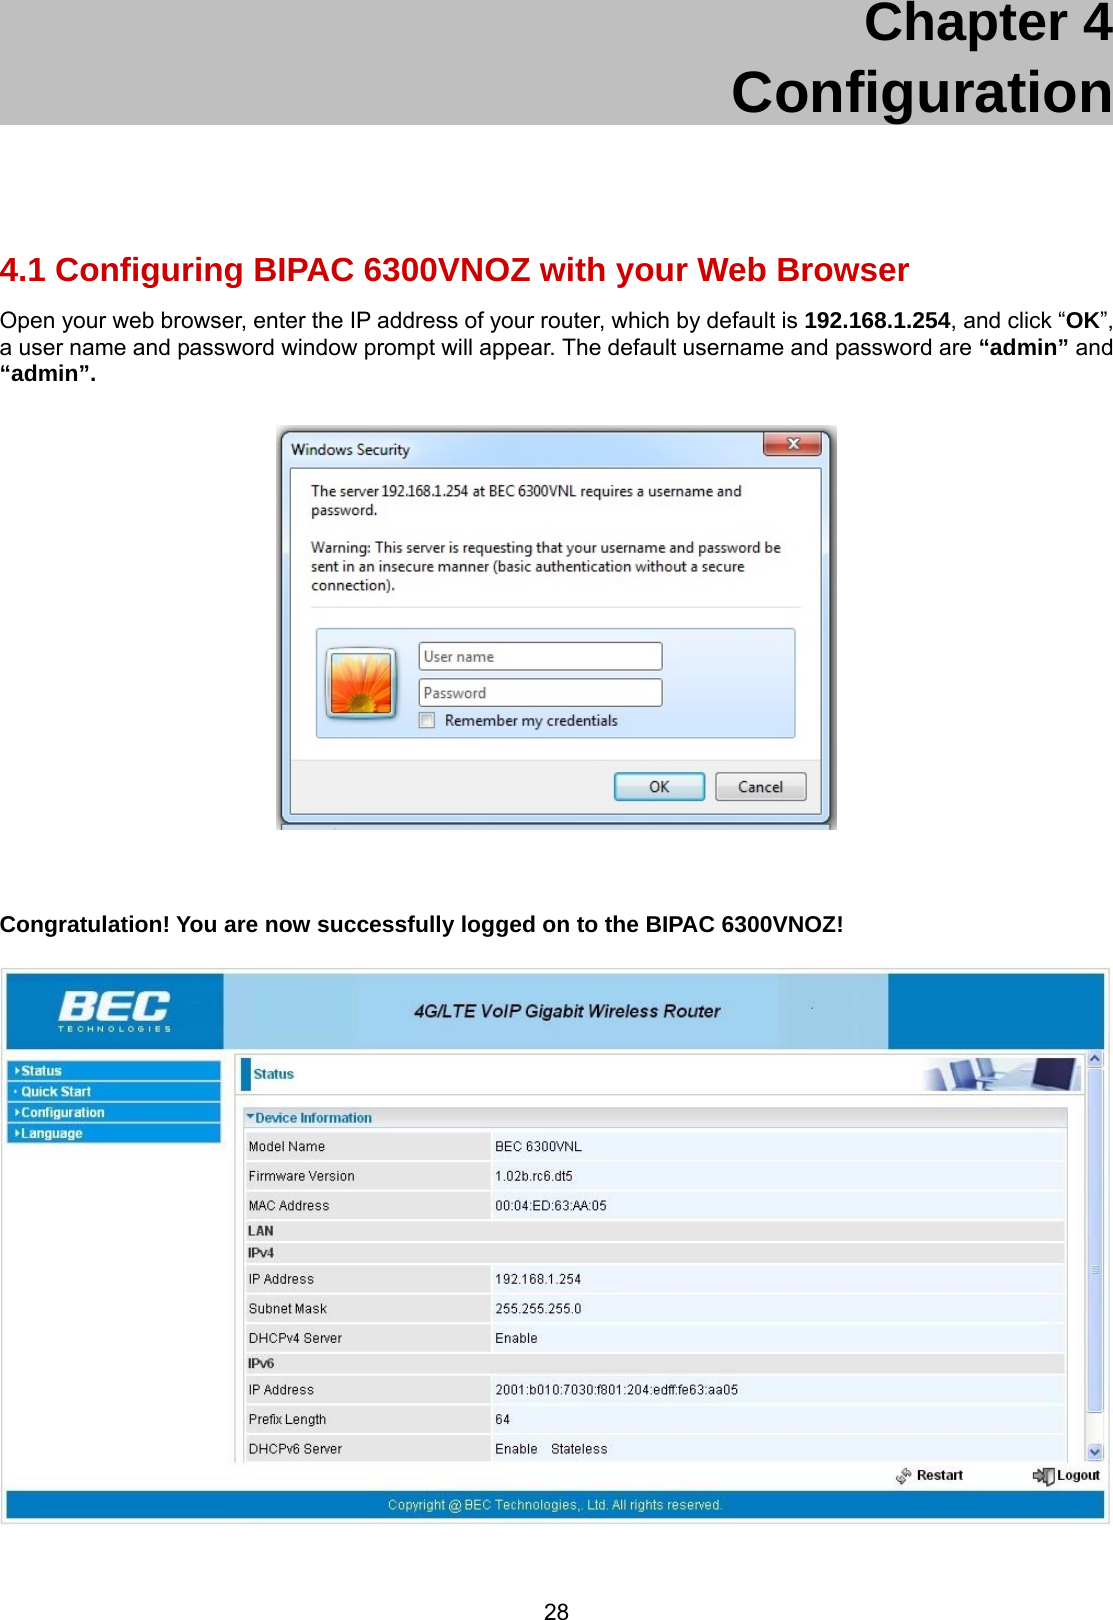 28 Chapter 4    Configuration  4.1 Configuring BIPAC 6300VNOZ with your Web Browser Open your web browser, enter the IP address of your router, which by default is 192.168.1.254, and click “OK”, a user name and password window prompt will appear. The default username and password are “admin” and “admin”.      Congratulation! You are now successfully logged on to the BIPAC 6300VNOZ!  